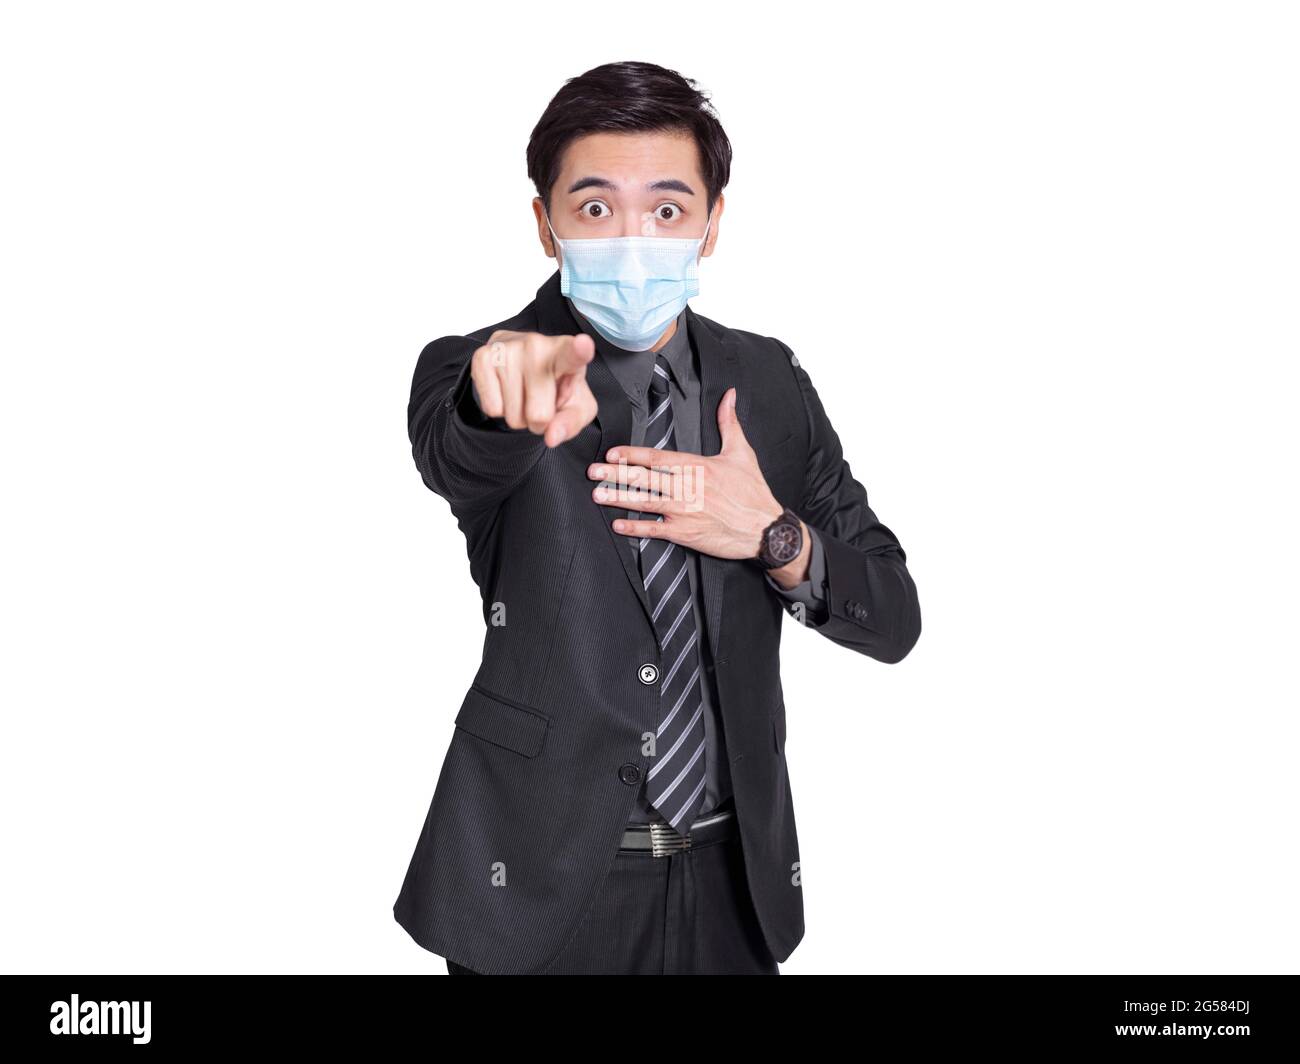 Businessman wearing face protective medical mask for protection from virus disease pointing finger to camera Stock Photo